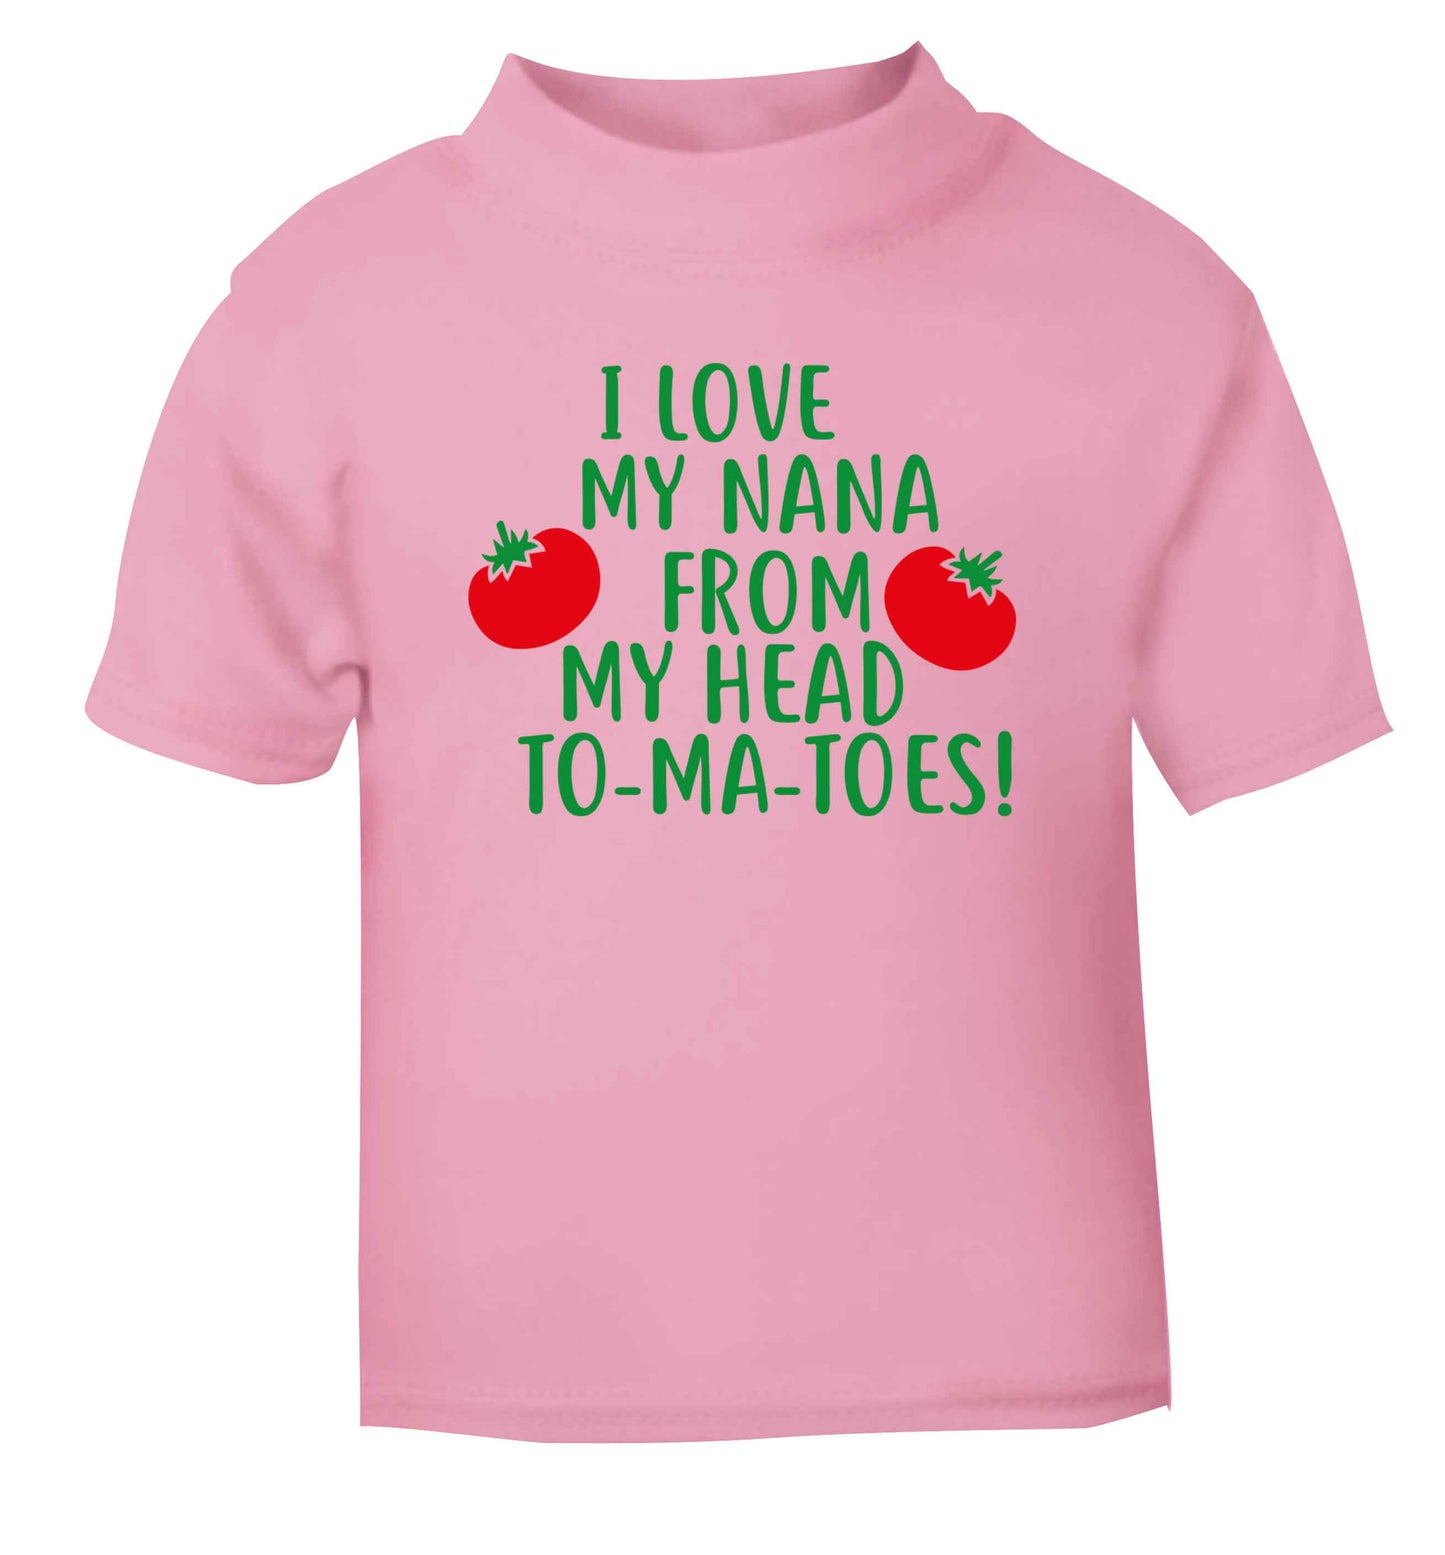 I love my nana from my head to-ma-toes light pink Baby Toddler Tshirt 2 Years